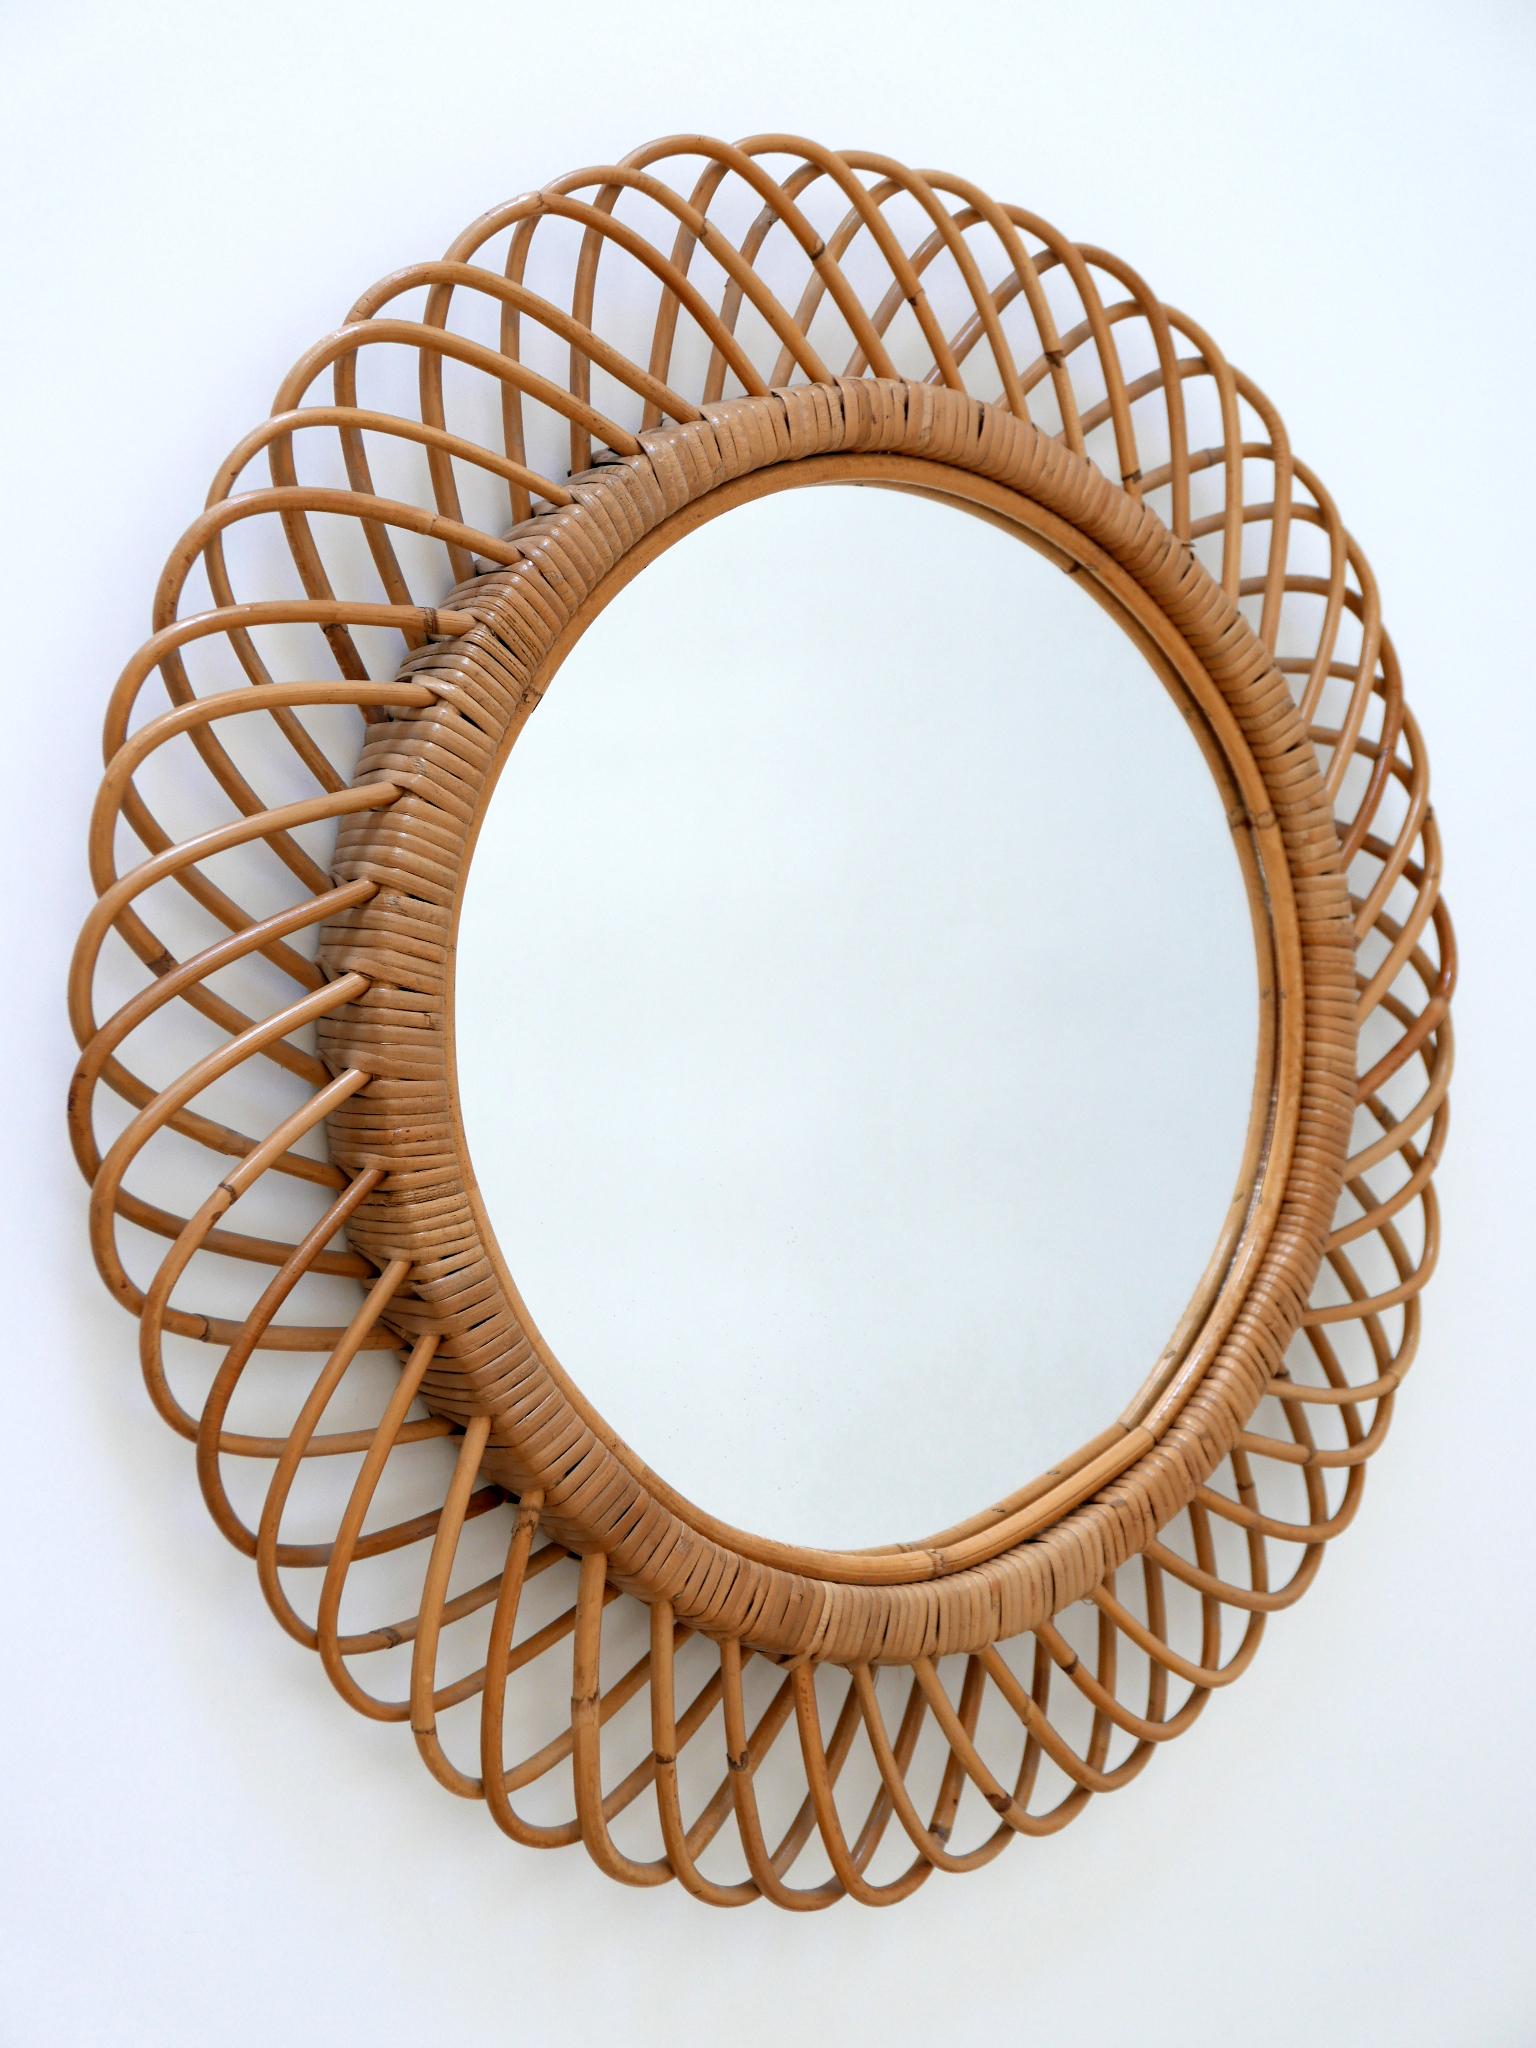 Highly decorative Mid-Century Modern circular wall mirror. Manufactured in Italy, 1960s.

Executed in rattan, bamboo and mirrored glass.

Condition:
Good original vintage condition. Wear consistent with use and age. 

Dimensions:
Diameter